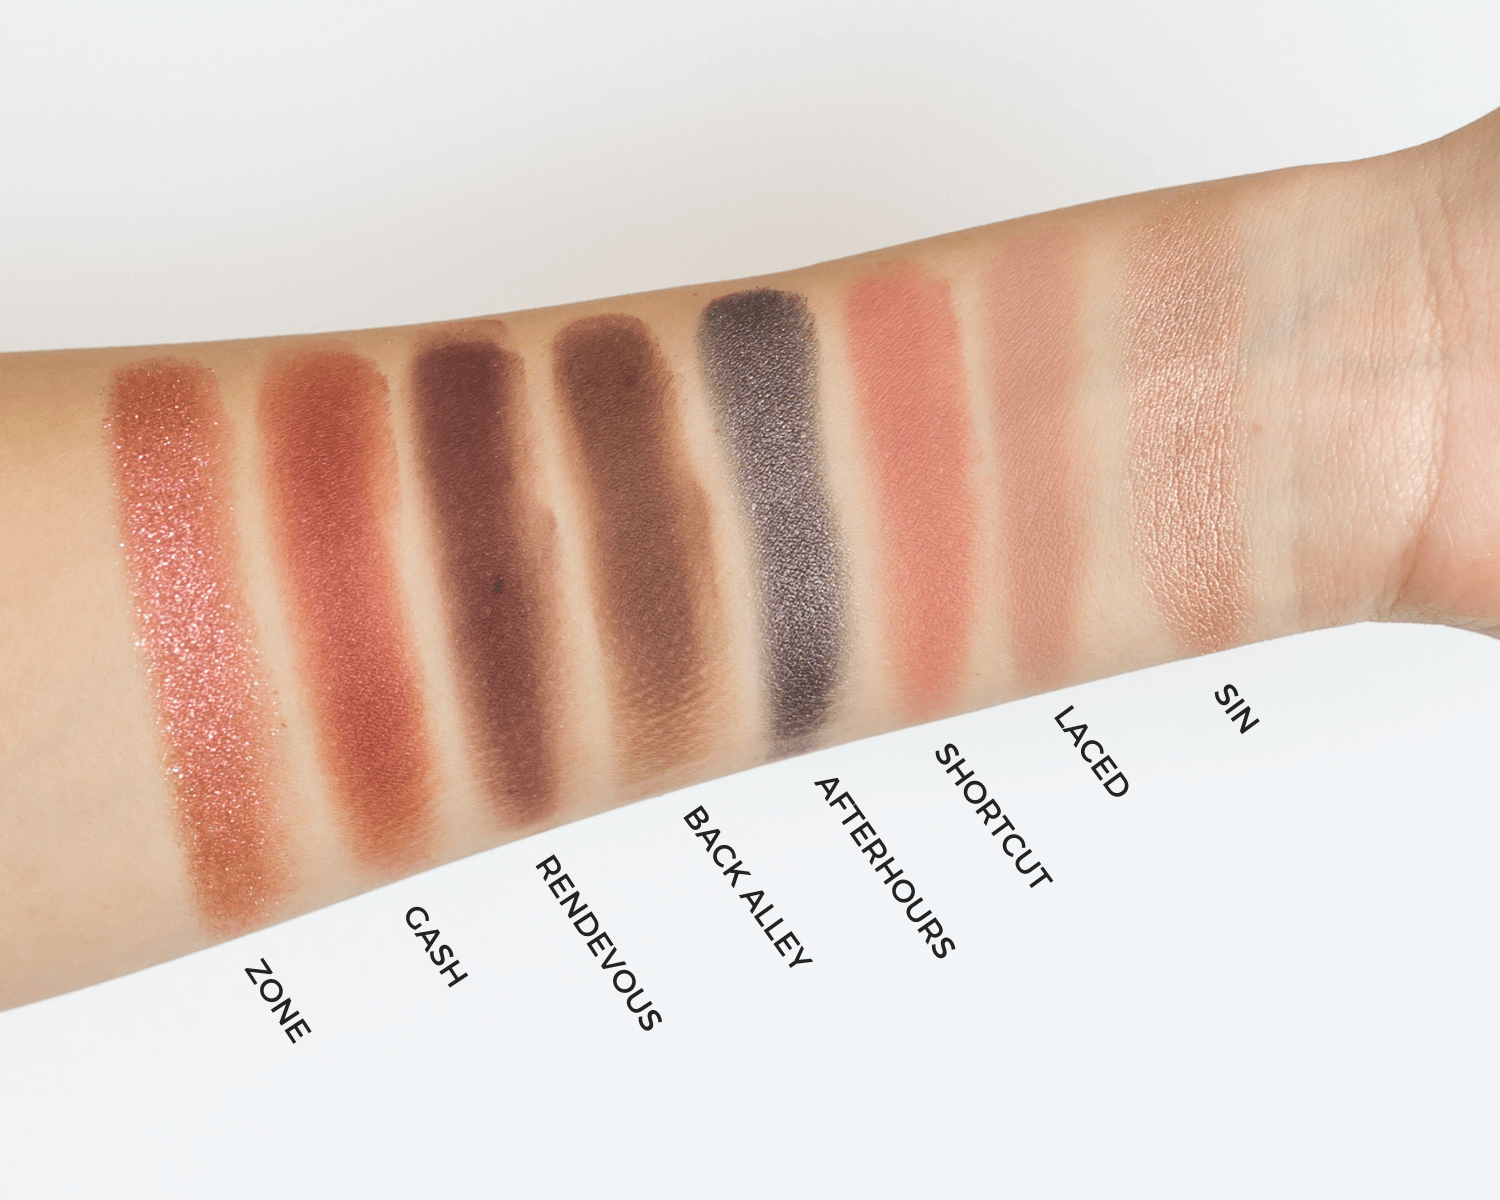 Urban Decay Shortcut Palette Swatches | Twinspiration